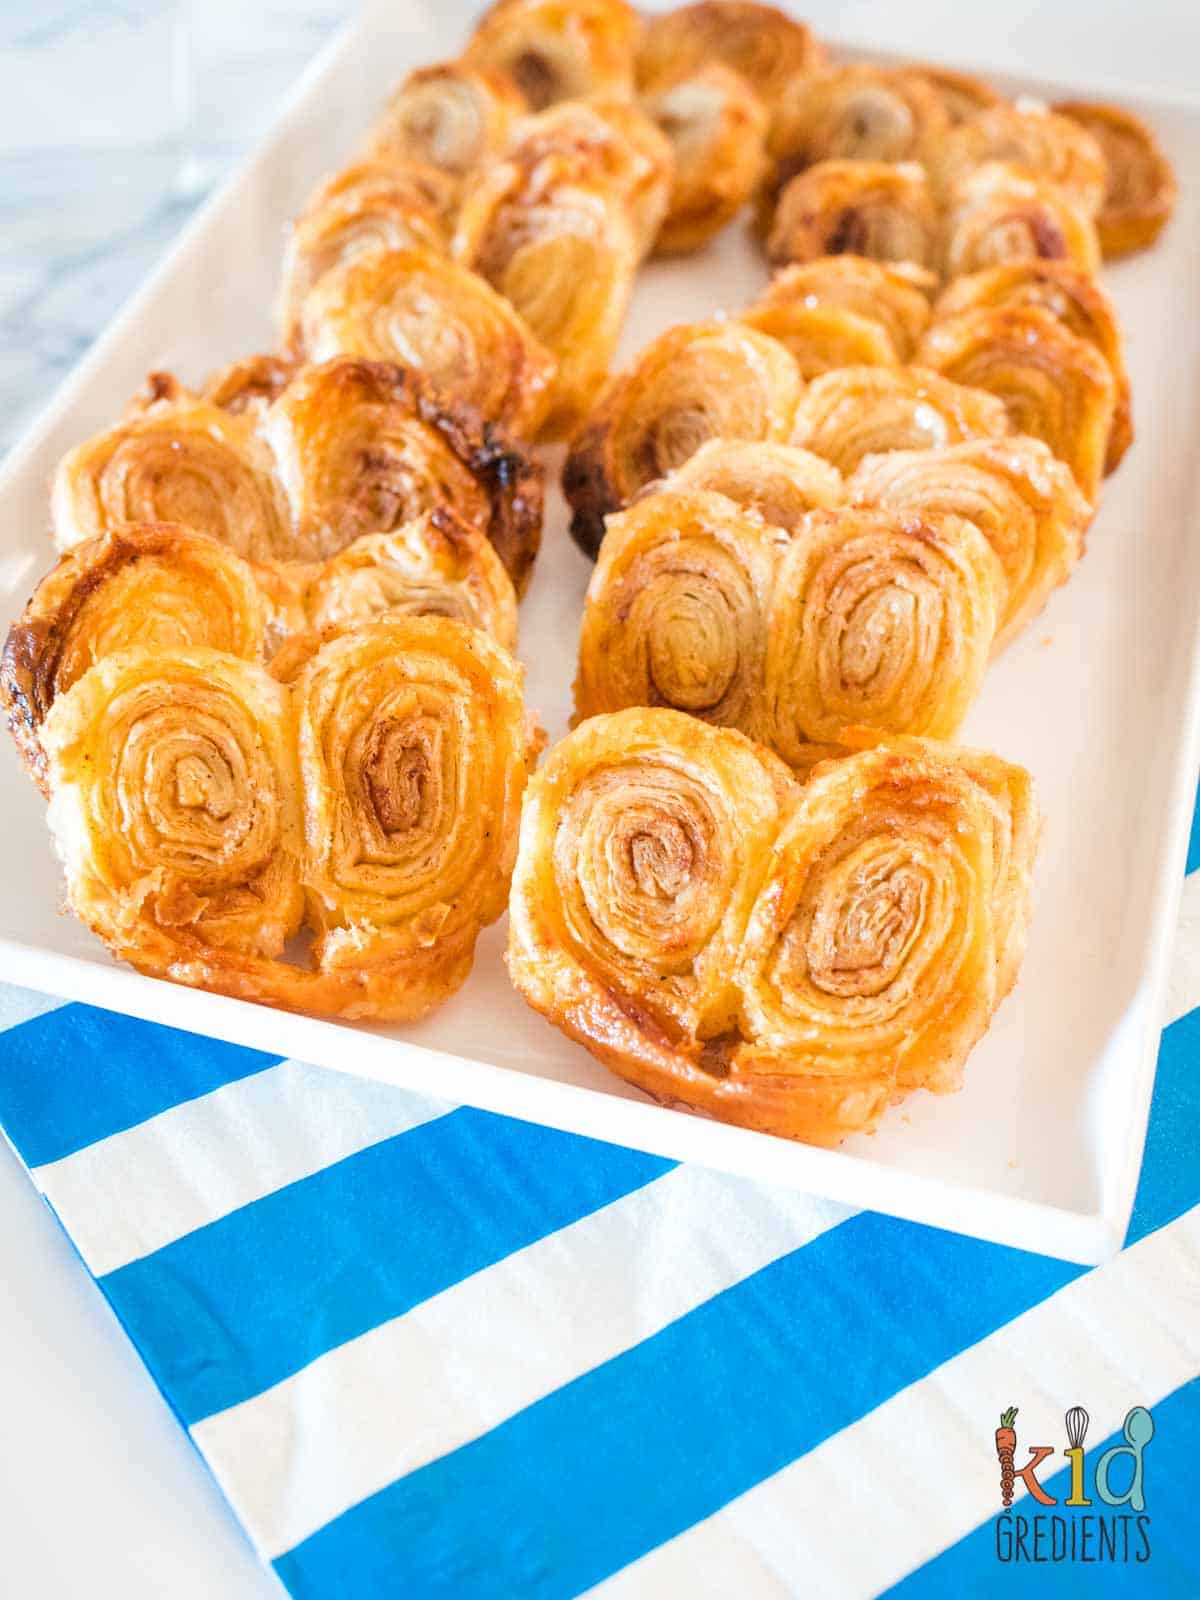 Cinnamon sugar palmiers on a plate with a blue and white napkin.